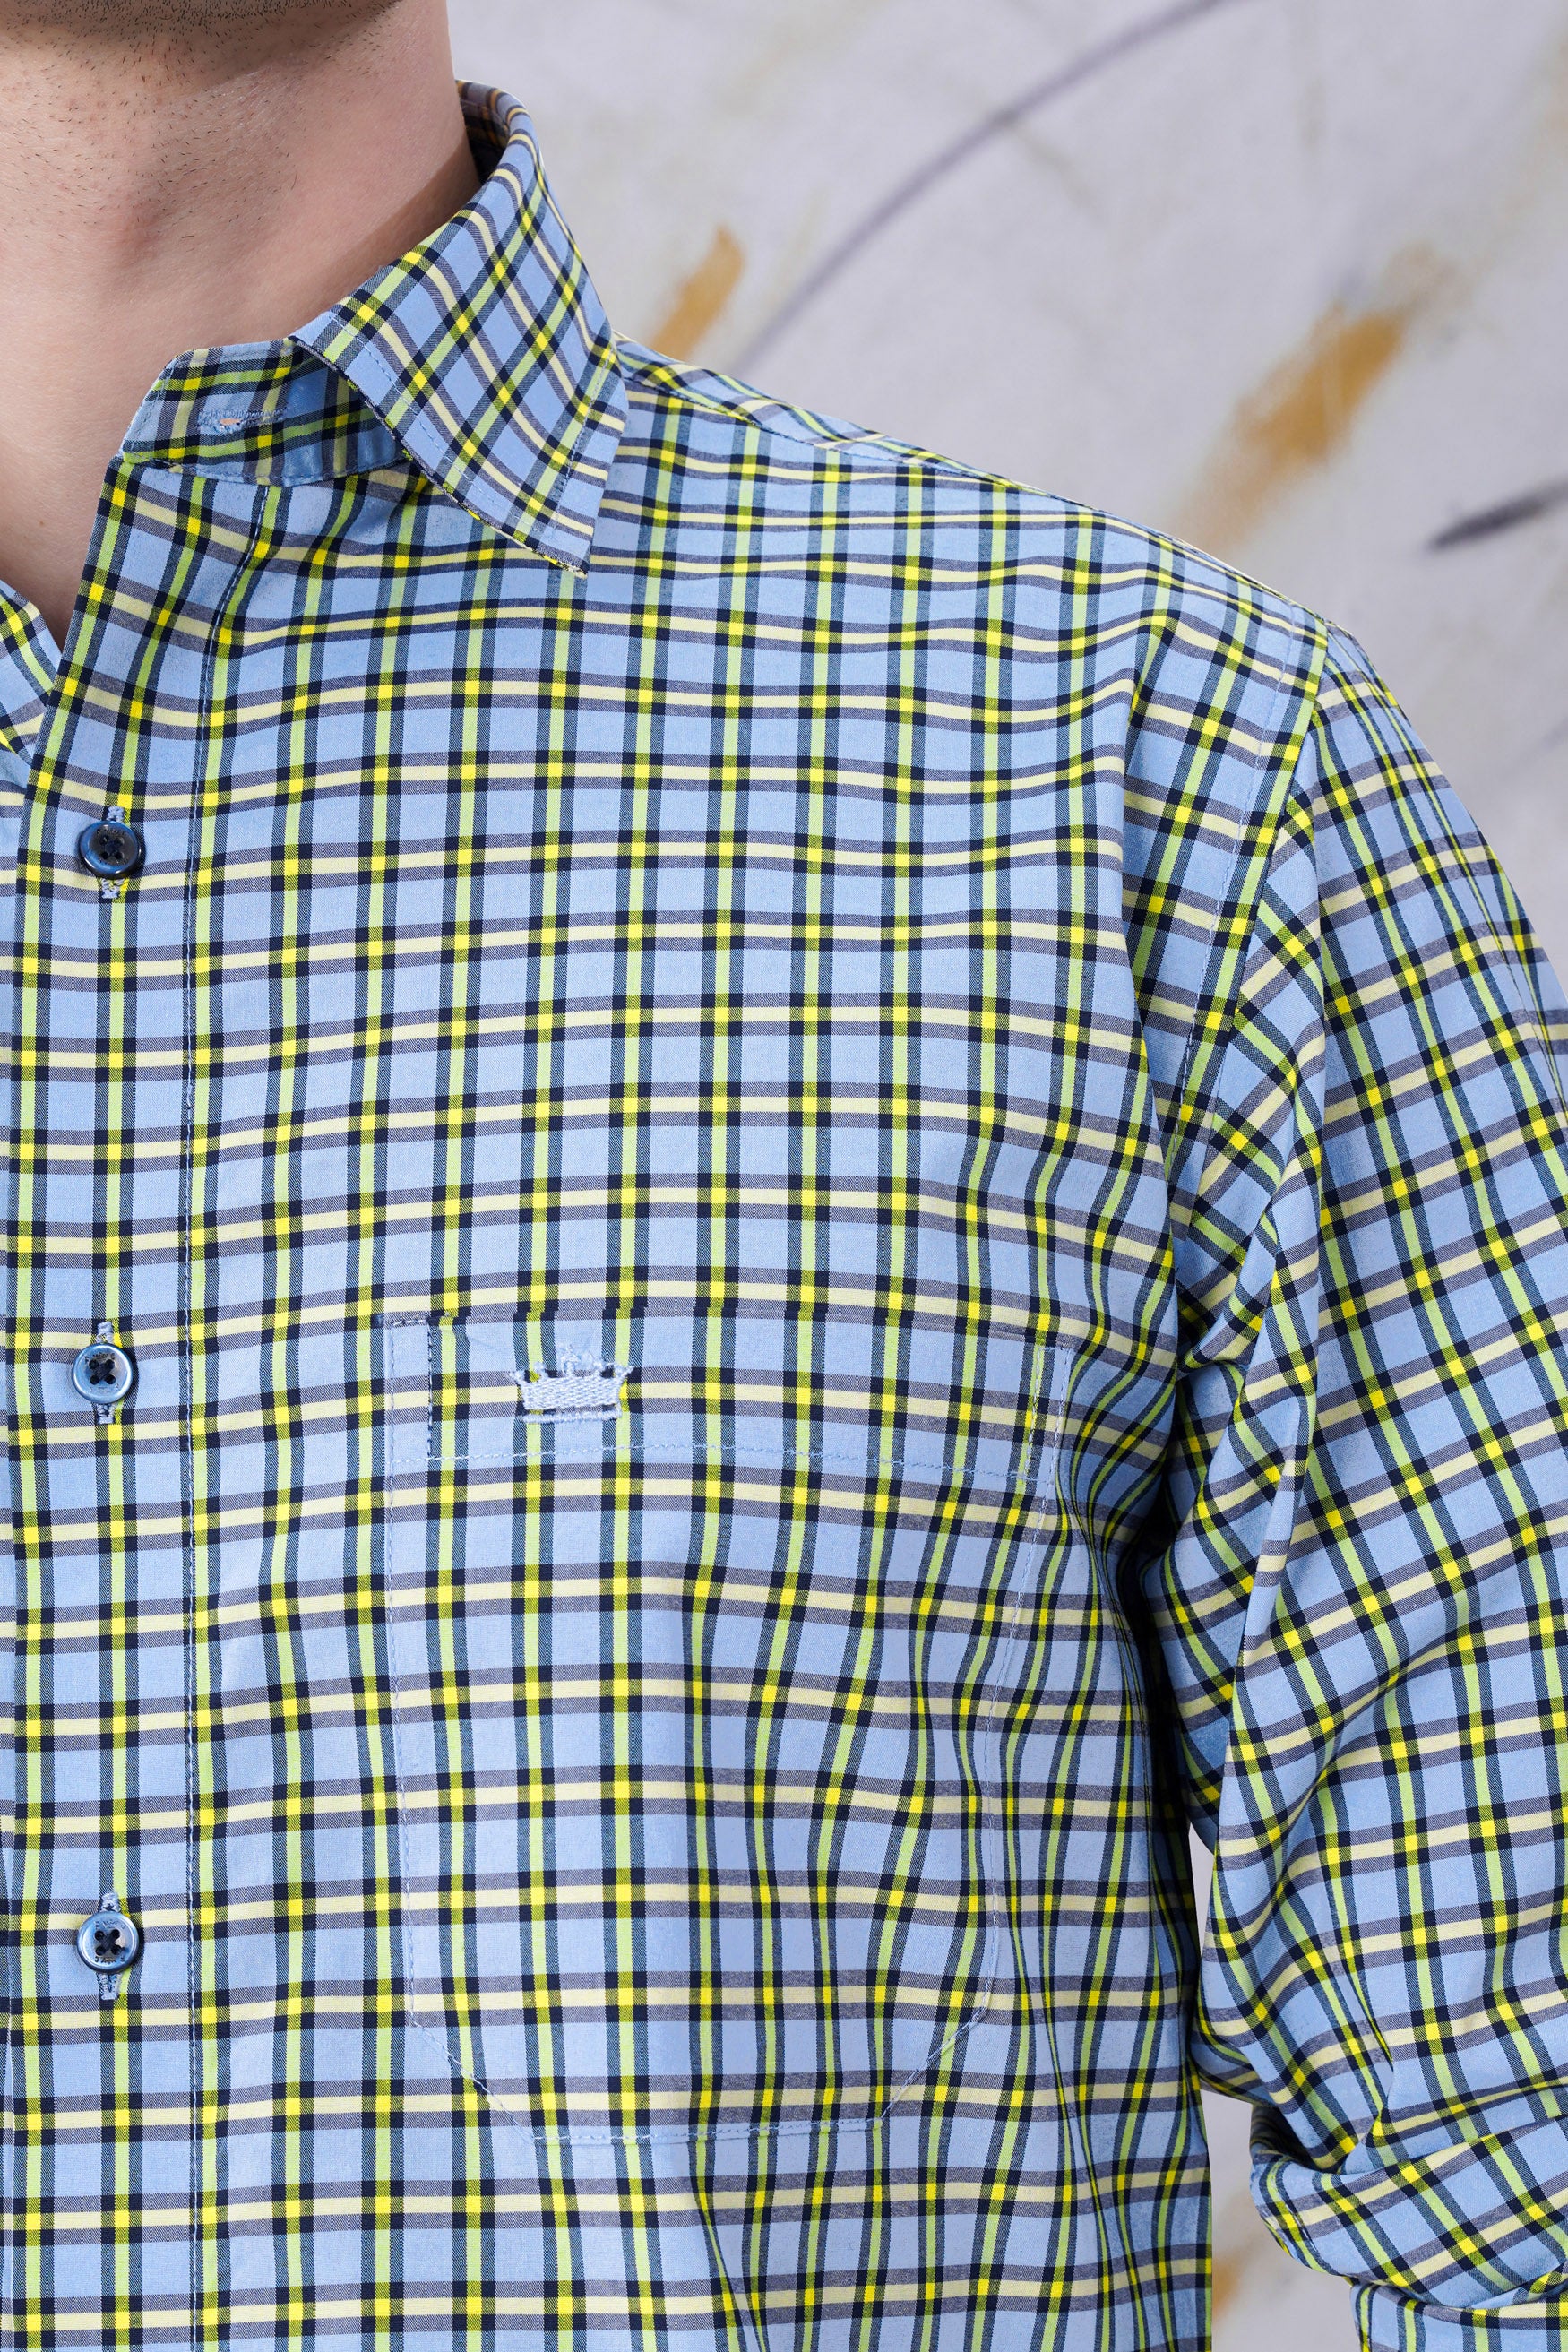 Jordy Blue and Jasmine Yellow Checkered Premium Cotton Shirt 11680-BLE-38, 11680-BLE-H-38, 11680-BLE-39, 11680-BLE-H-39, 11680-BLE-40, 11680-BLE-H-40, 11680-BLE-42, 11680-BLE-H-42, 11680-BLE-44, 11680-BLE-H-44, 11680-BLE-46, 11680-BLE-H-46, 11680-BLE-48, 11680-BLE-H-48, 11680-BLE-50, 11680-BLE-H-50, 11680-BLE-52, 11680-BLE-H-52